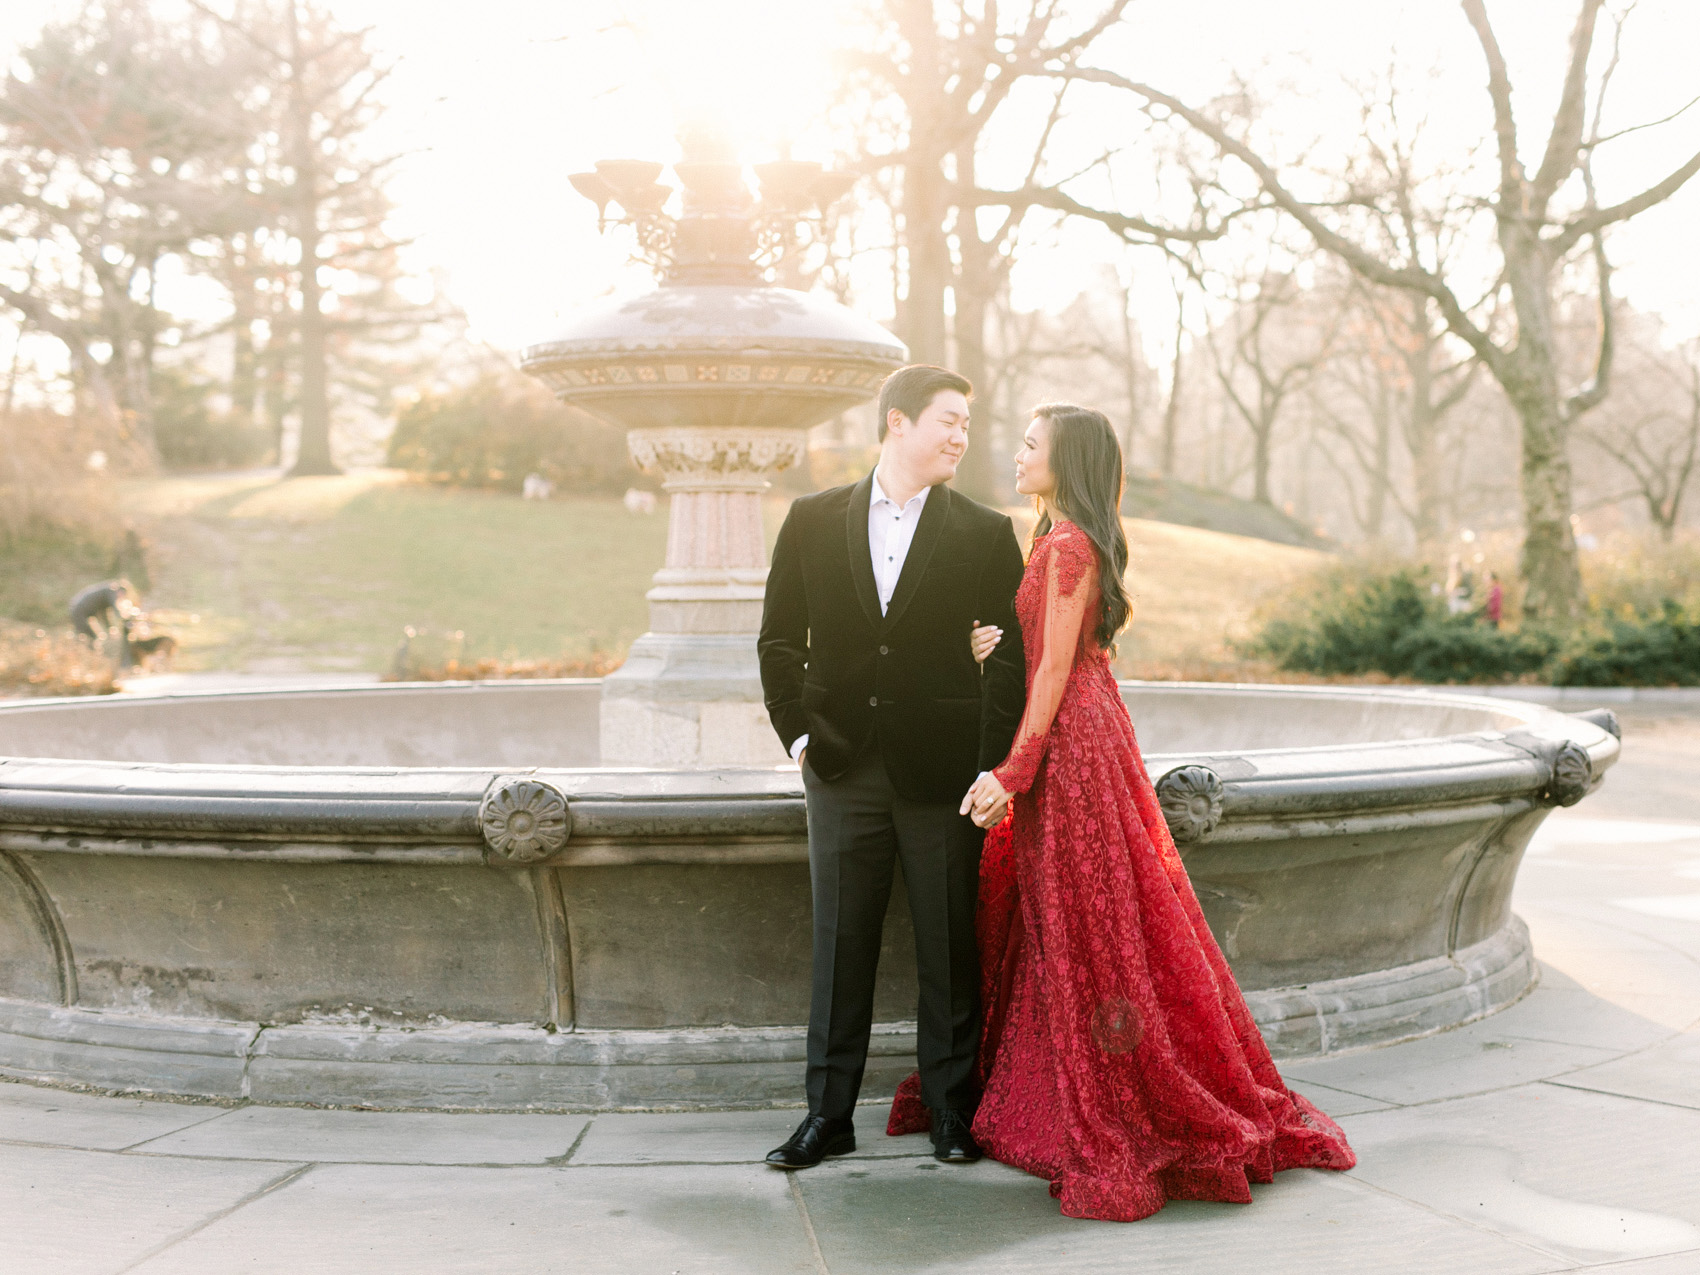 Vietnamese couple winter engagement photos shot in Central Park New York City wearing a red lace ballgown and black velvet tuxedo